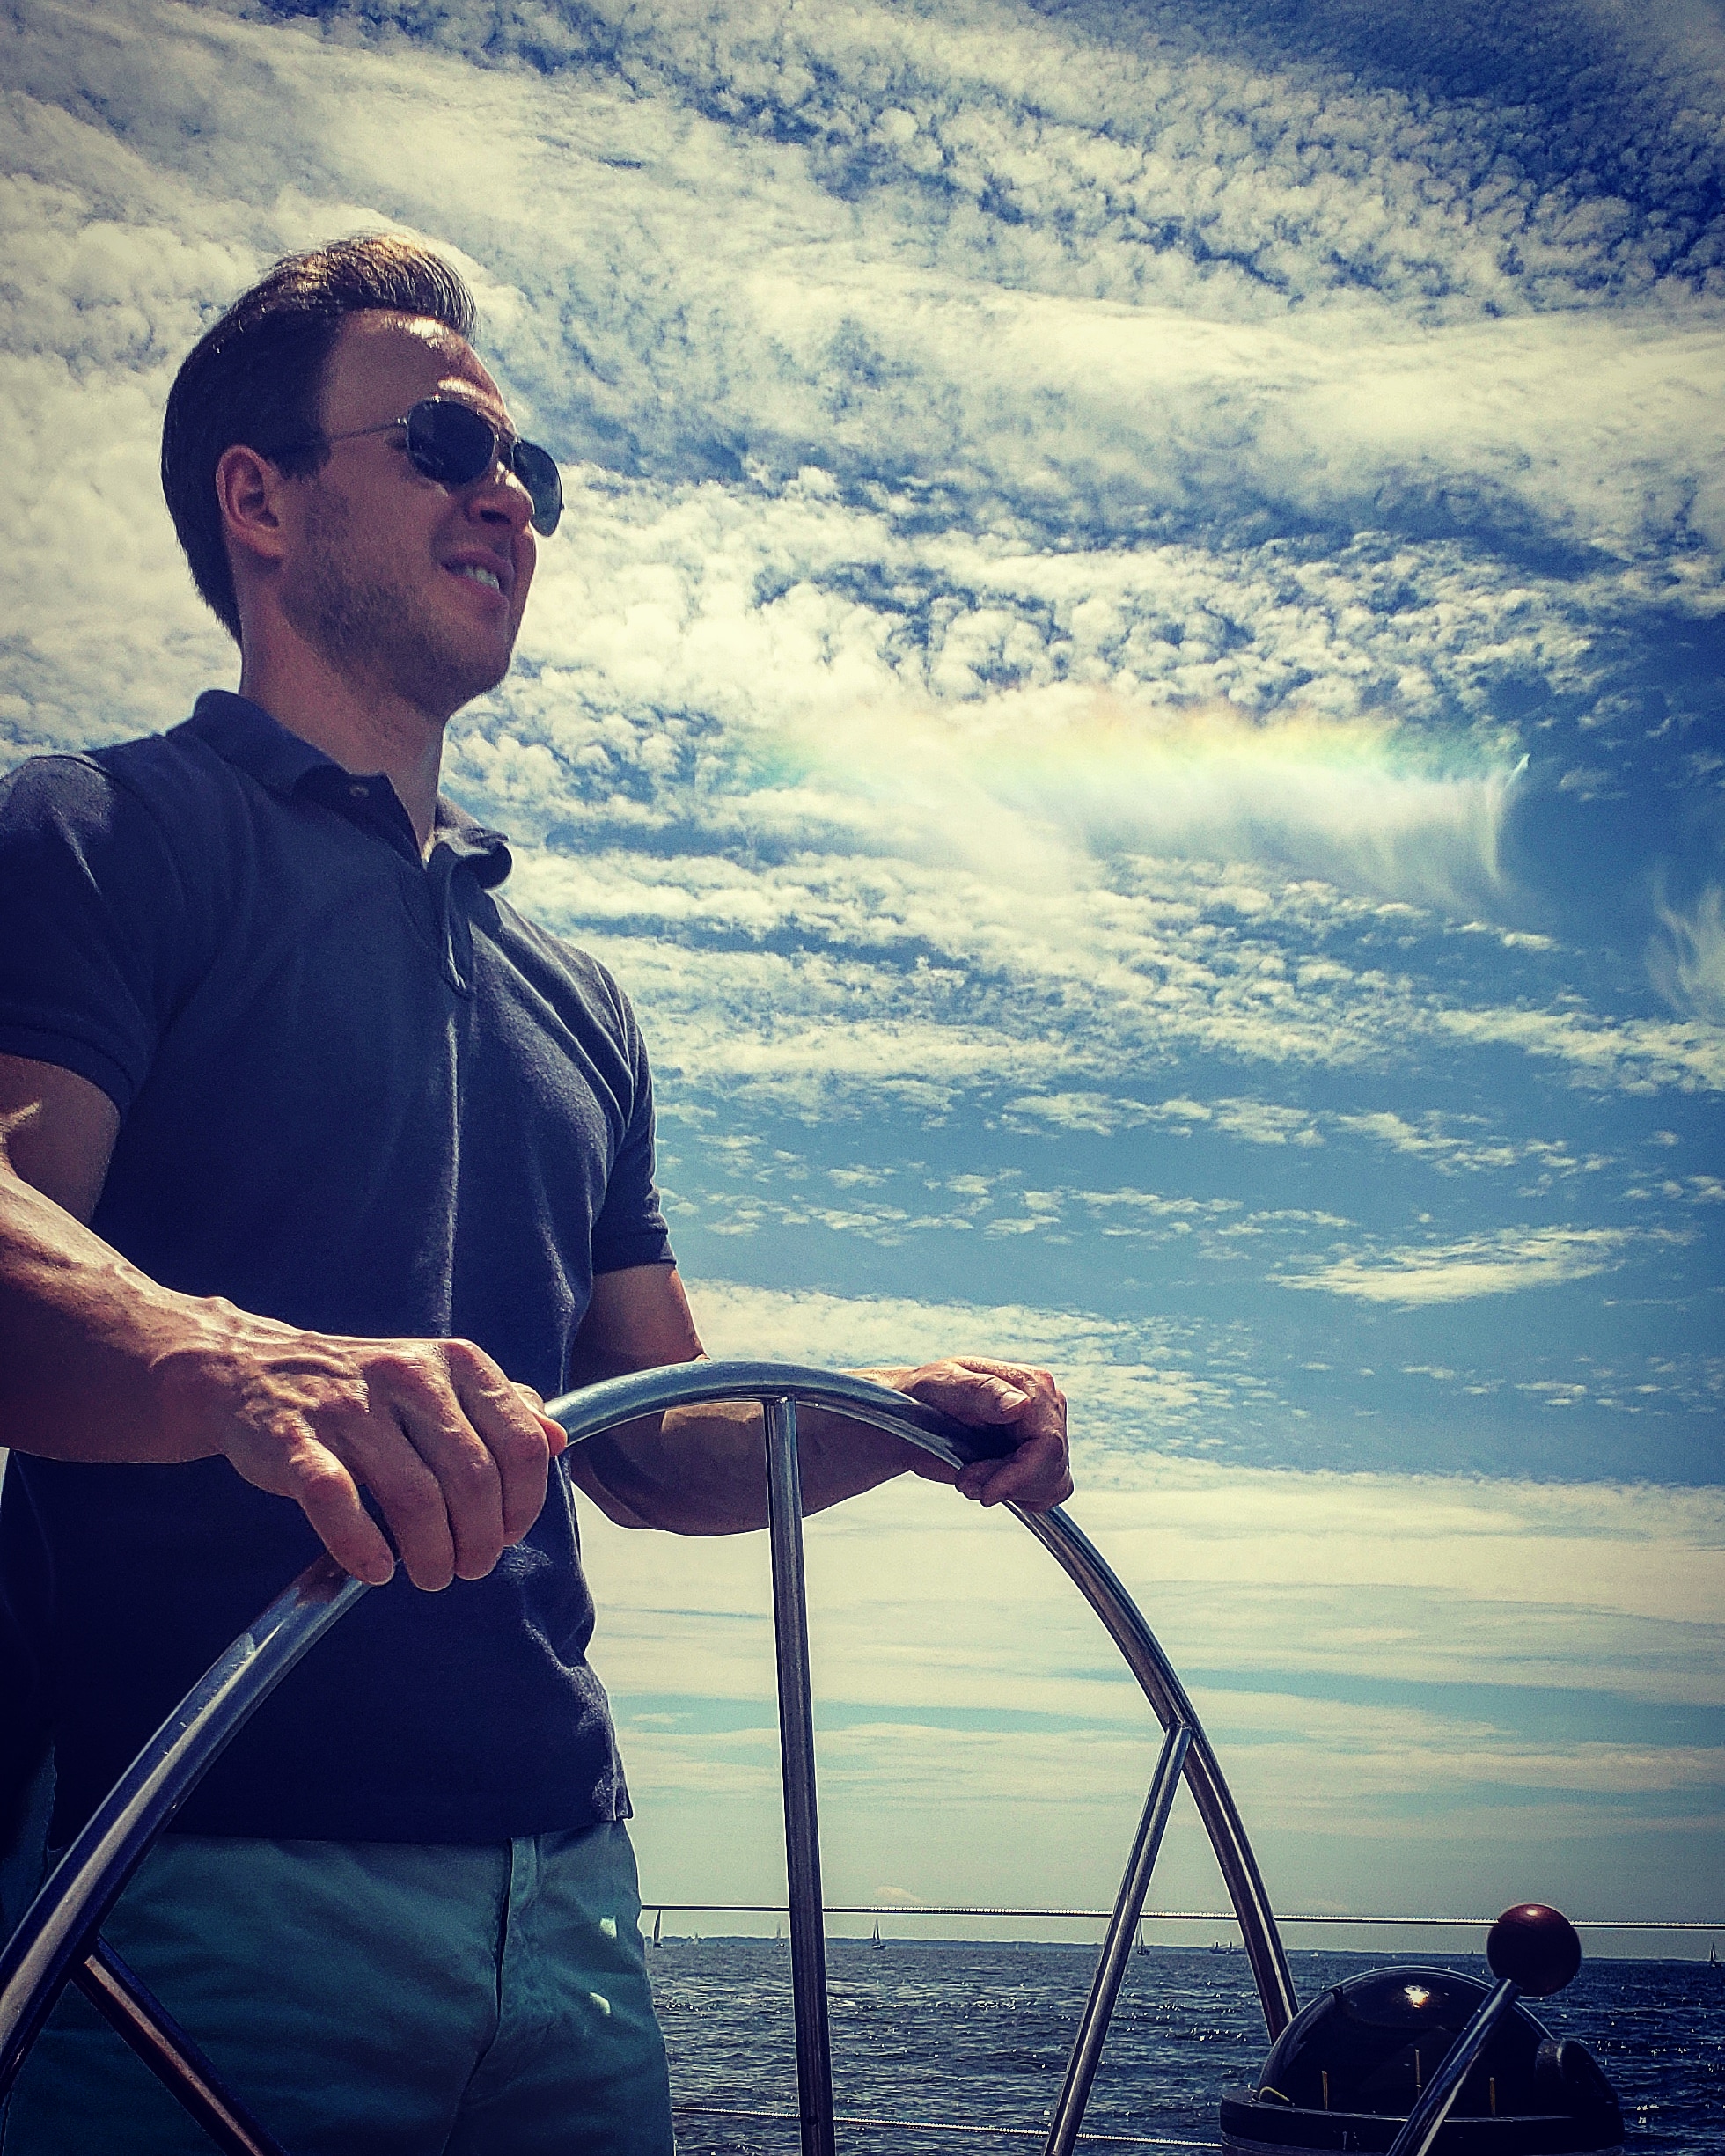 Man steering boat with blue skies and rainbow clouds behind him